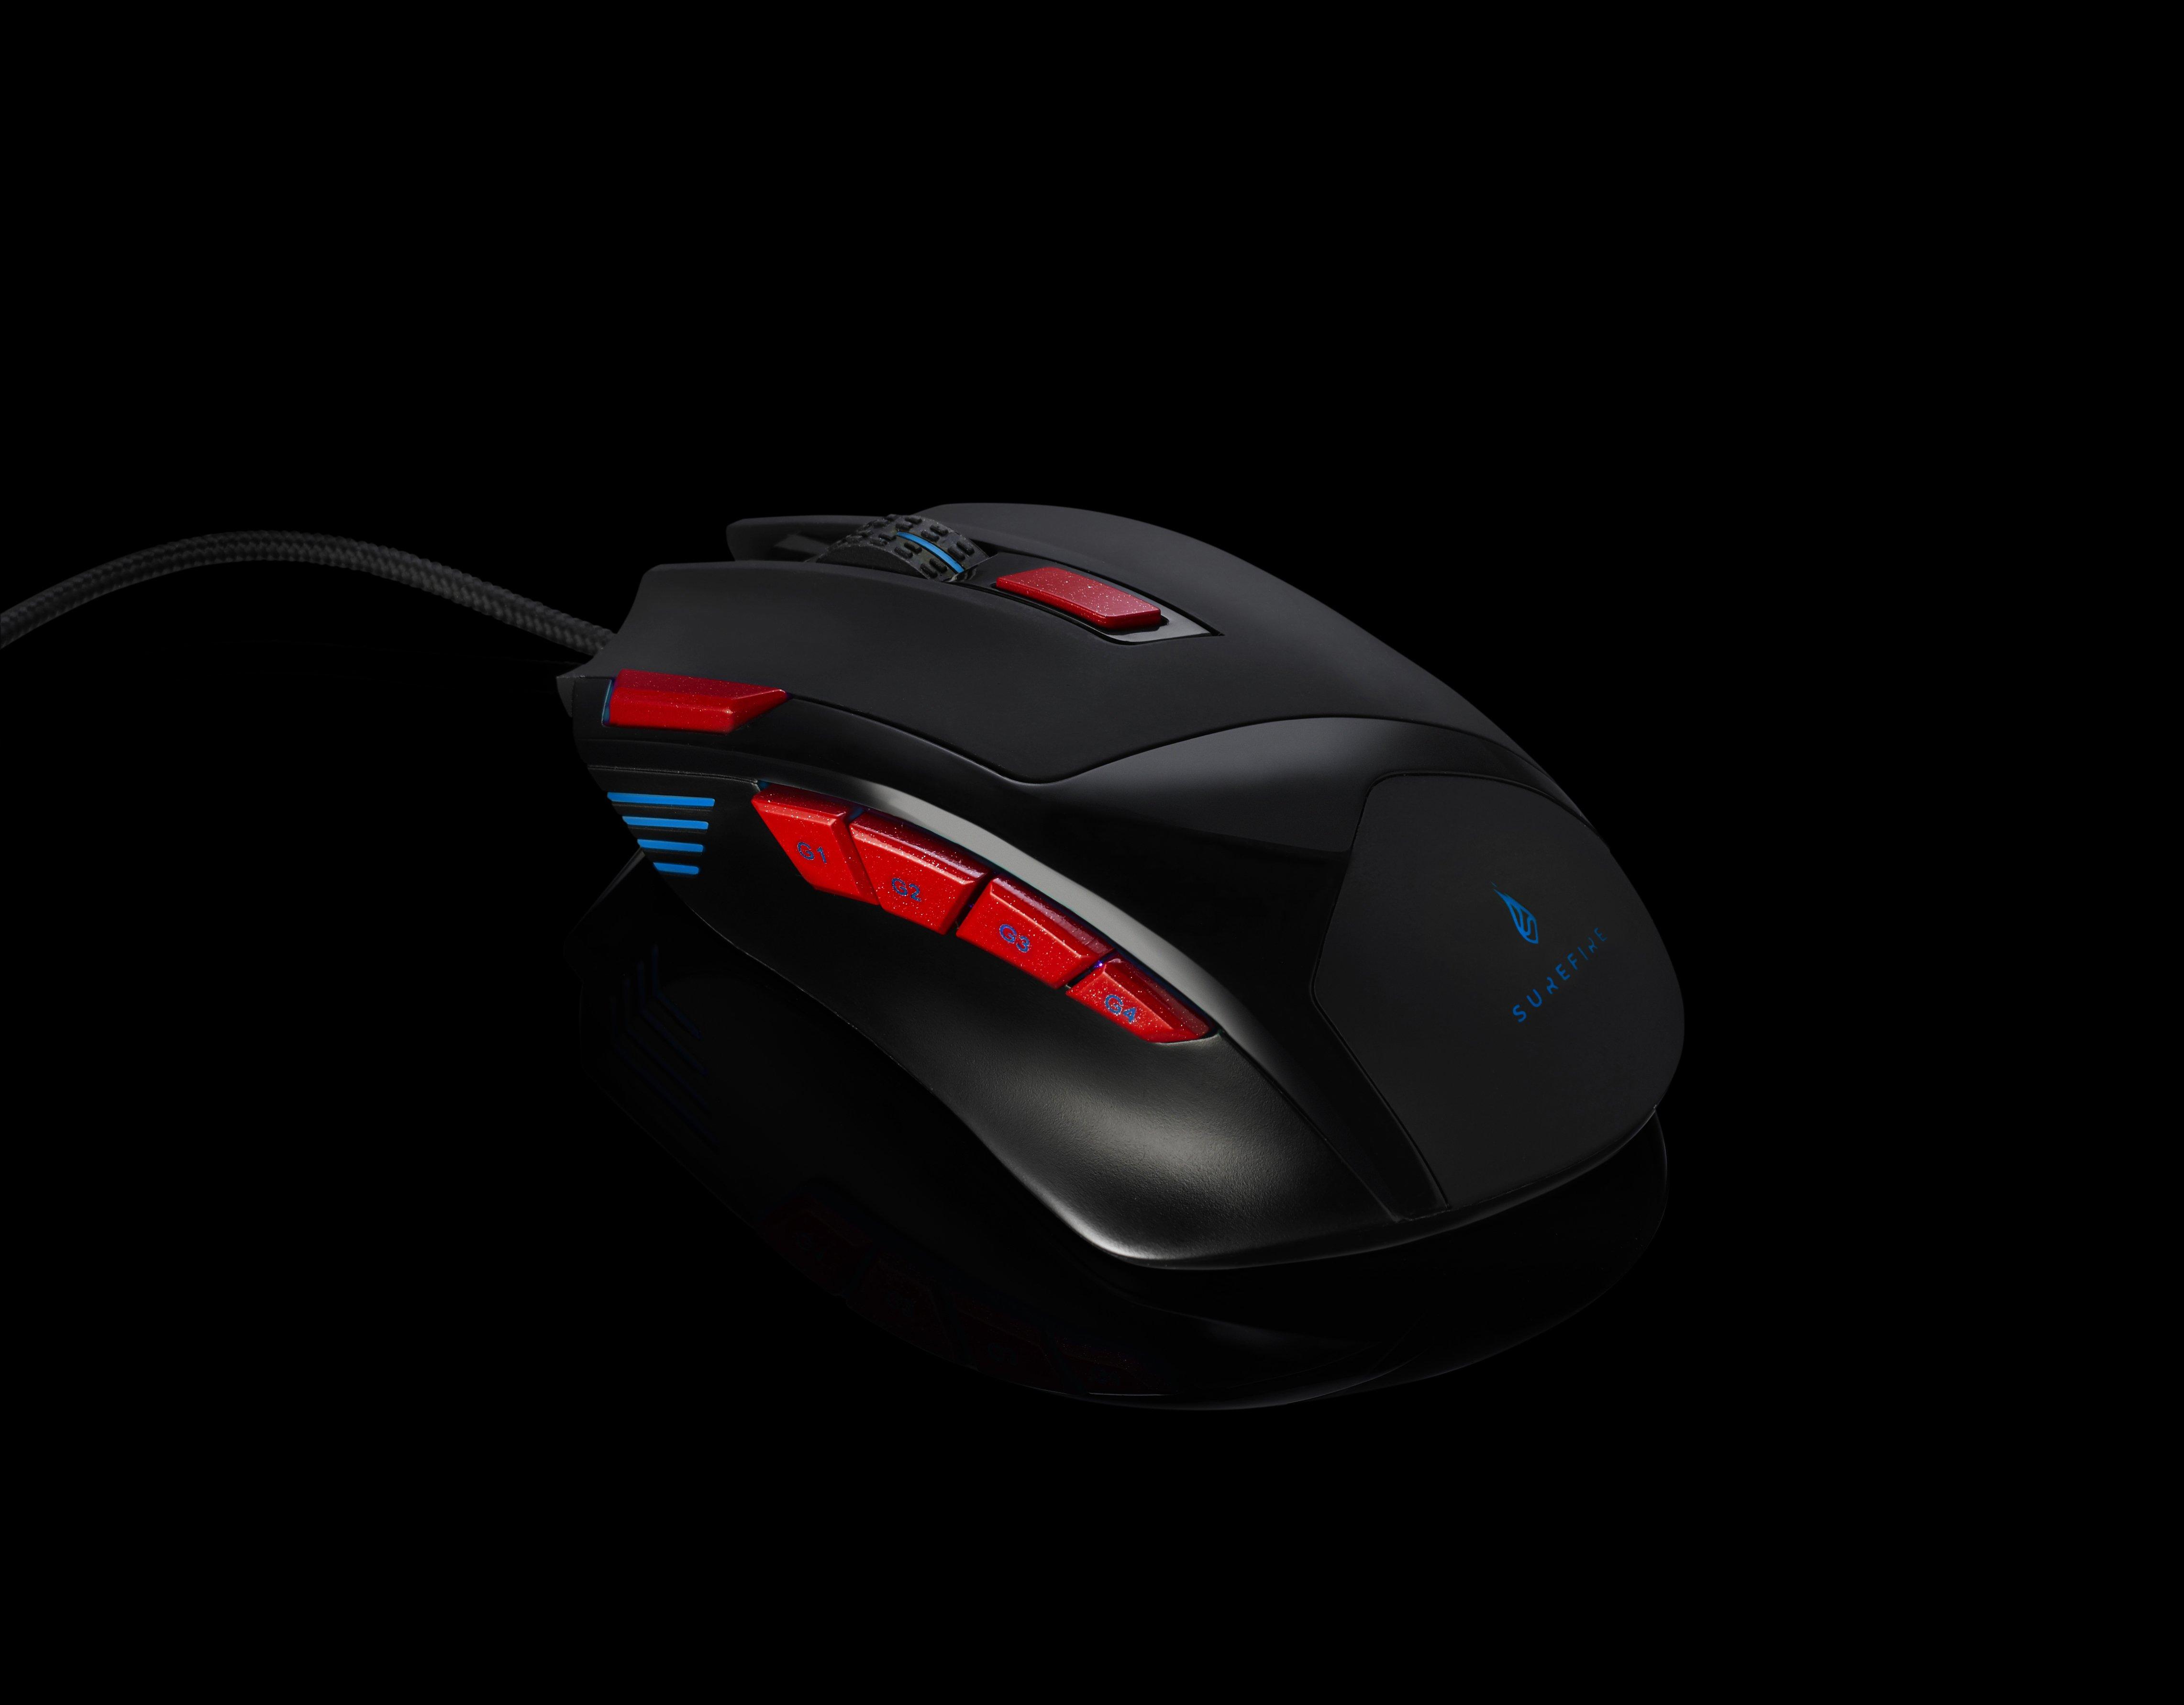 Surefire Gaming  SureFire Eagle Claw Gaming Mouse 